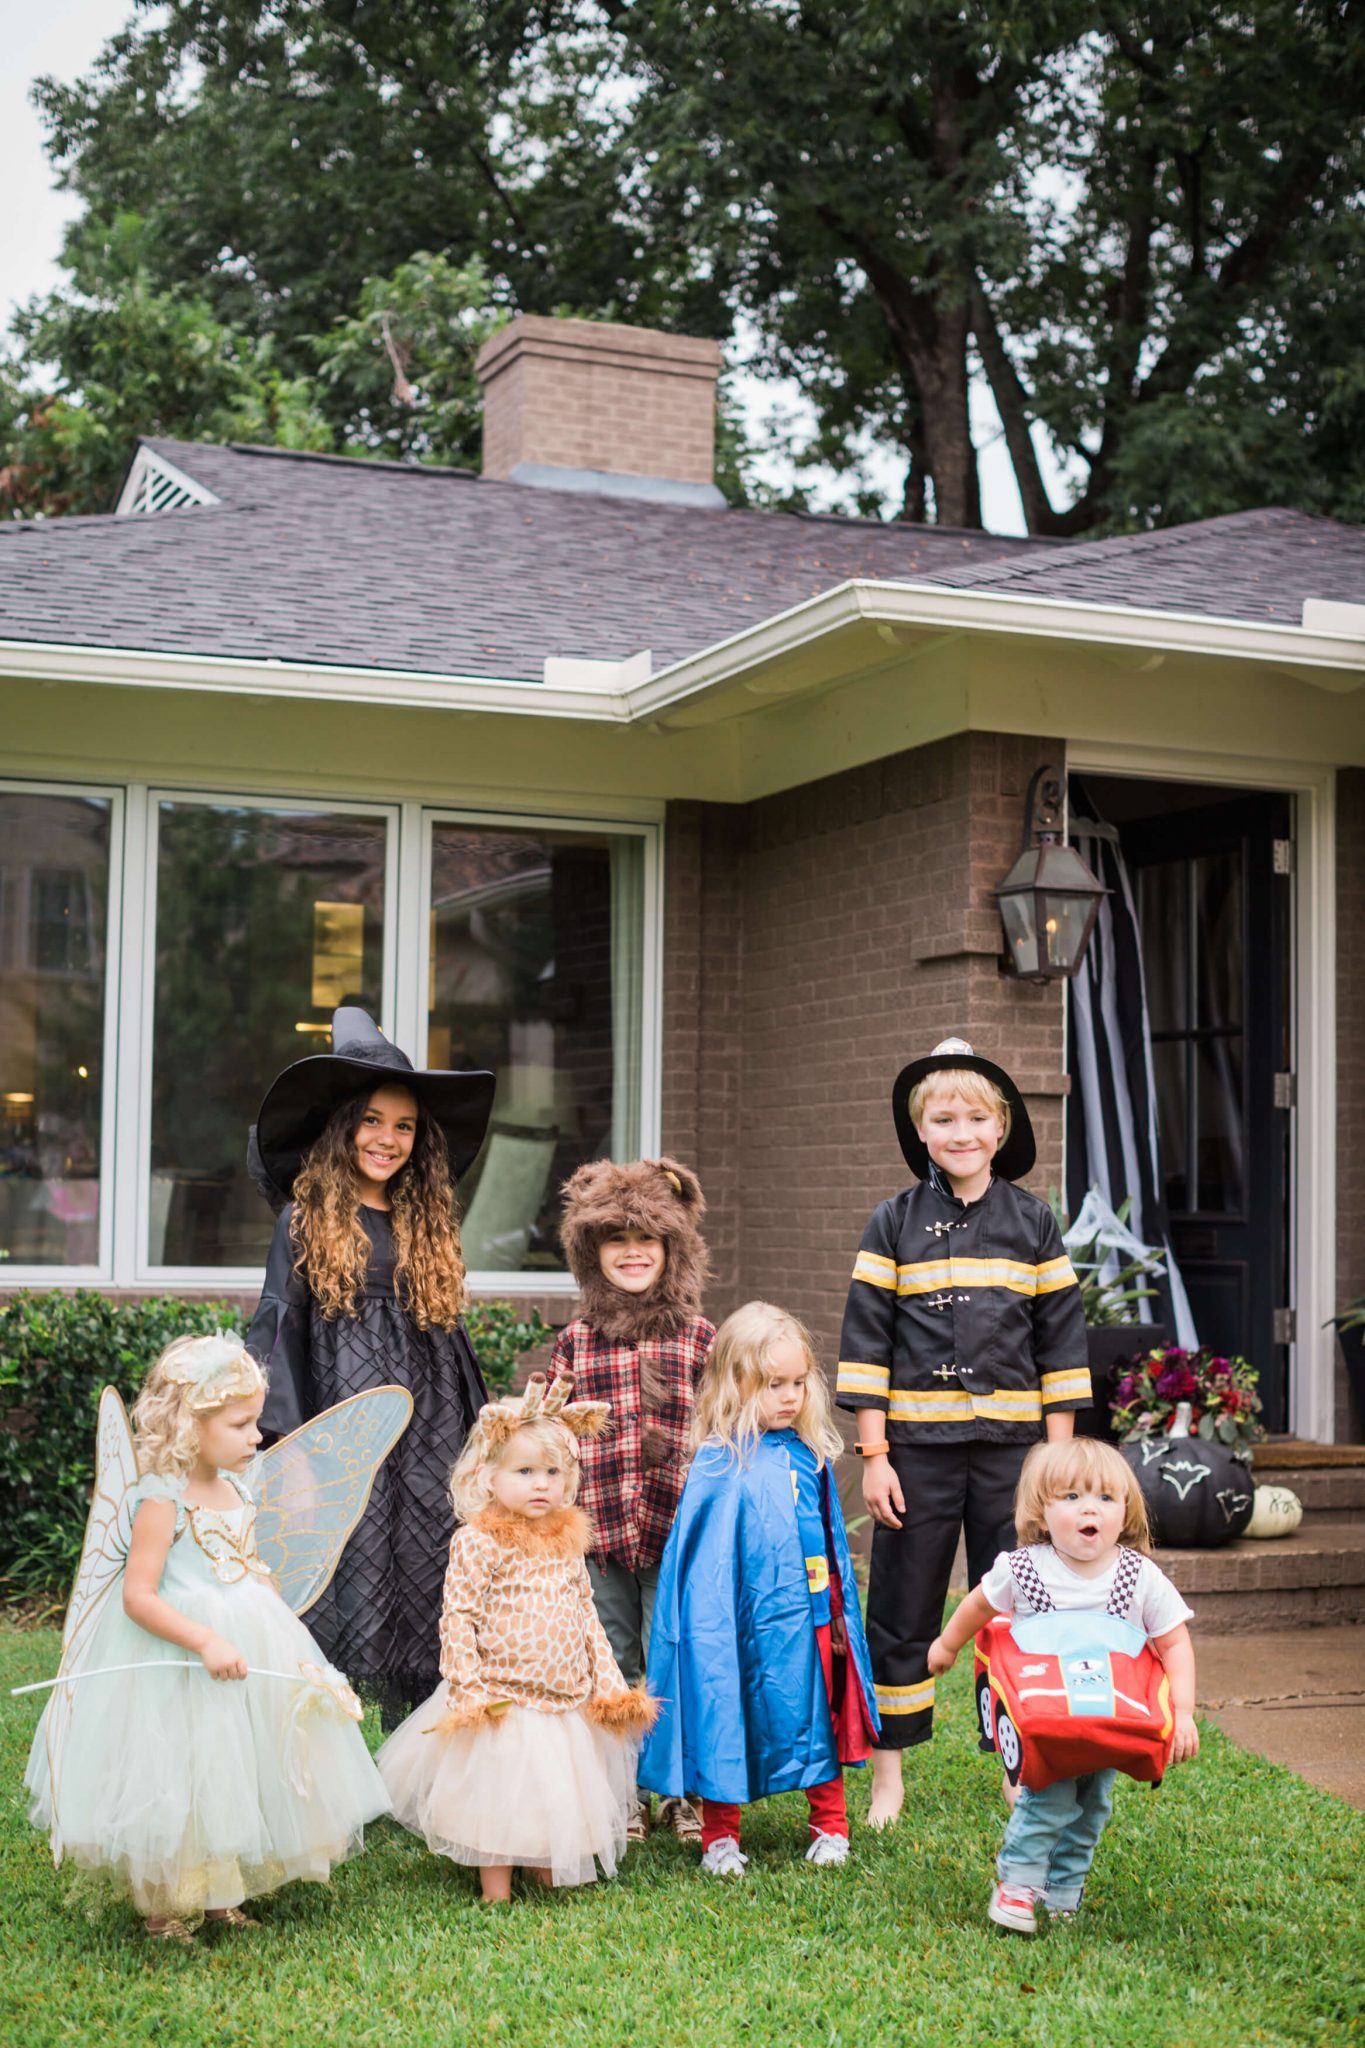 Halloween with Pottery Barn Kids // Halloween party decor and costumes // www.https://www.thehisfor.com